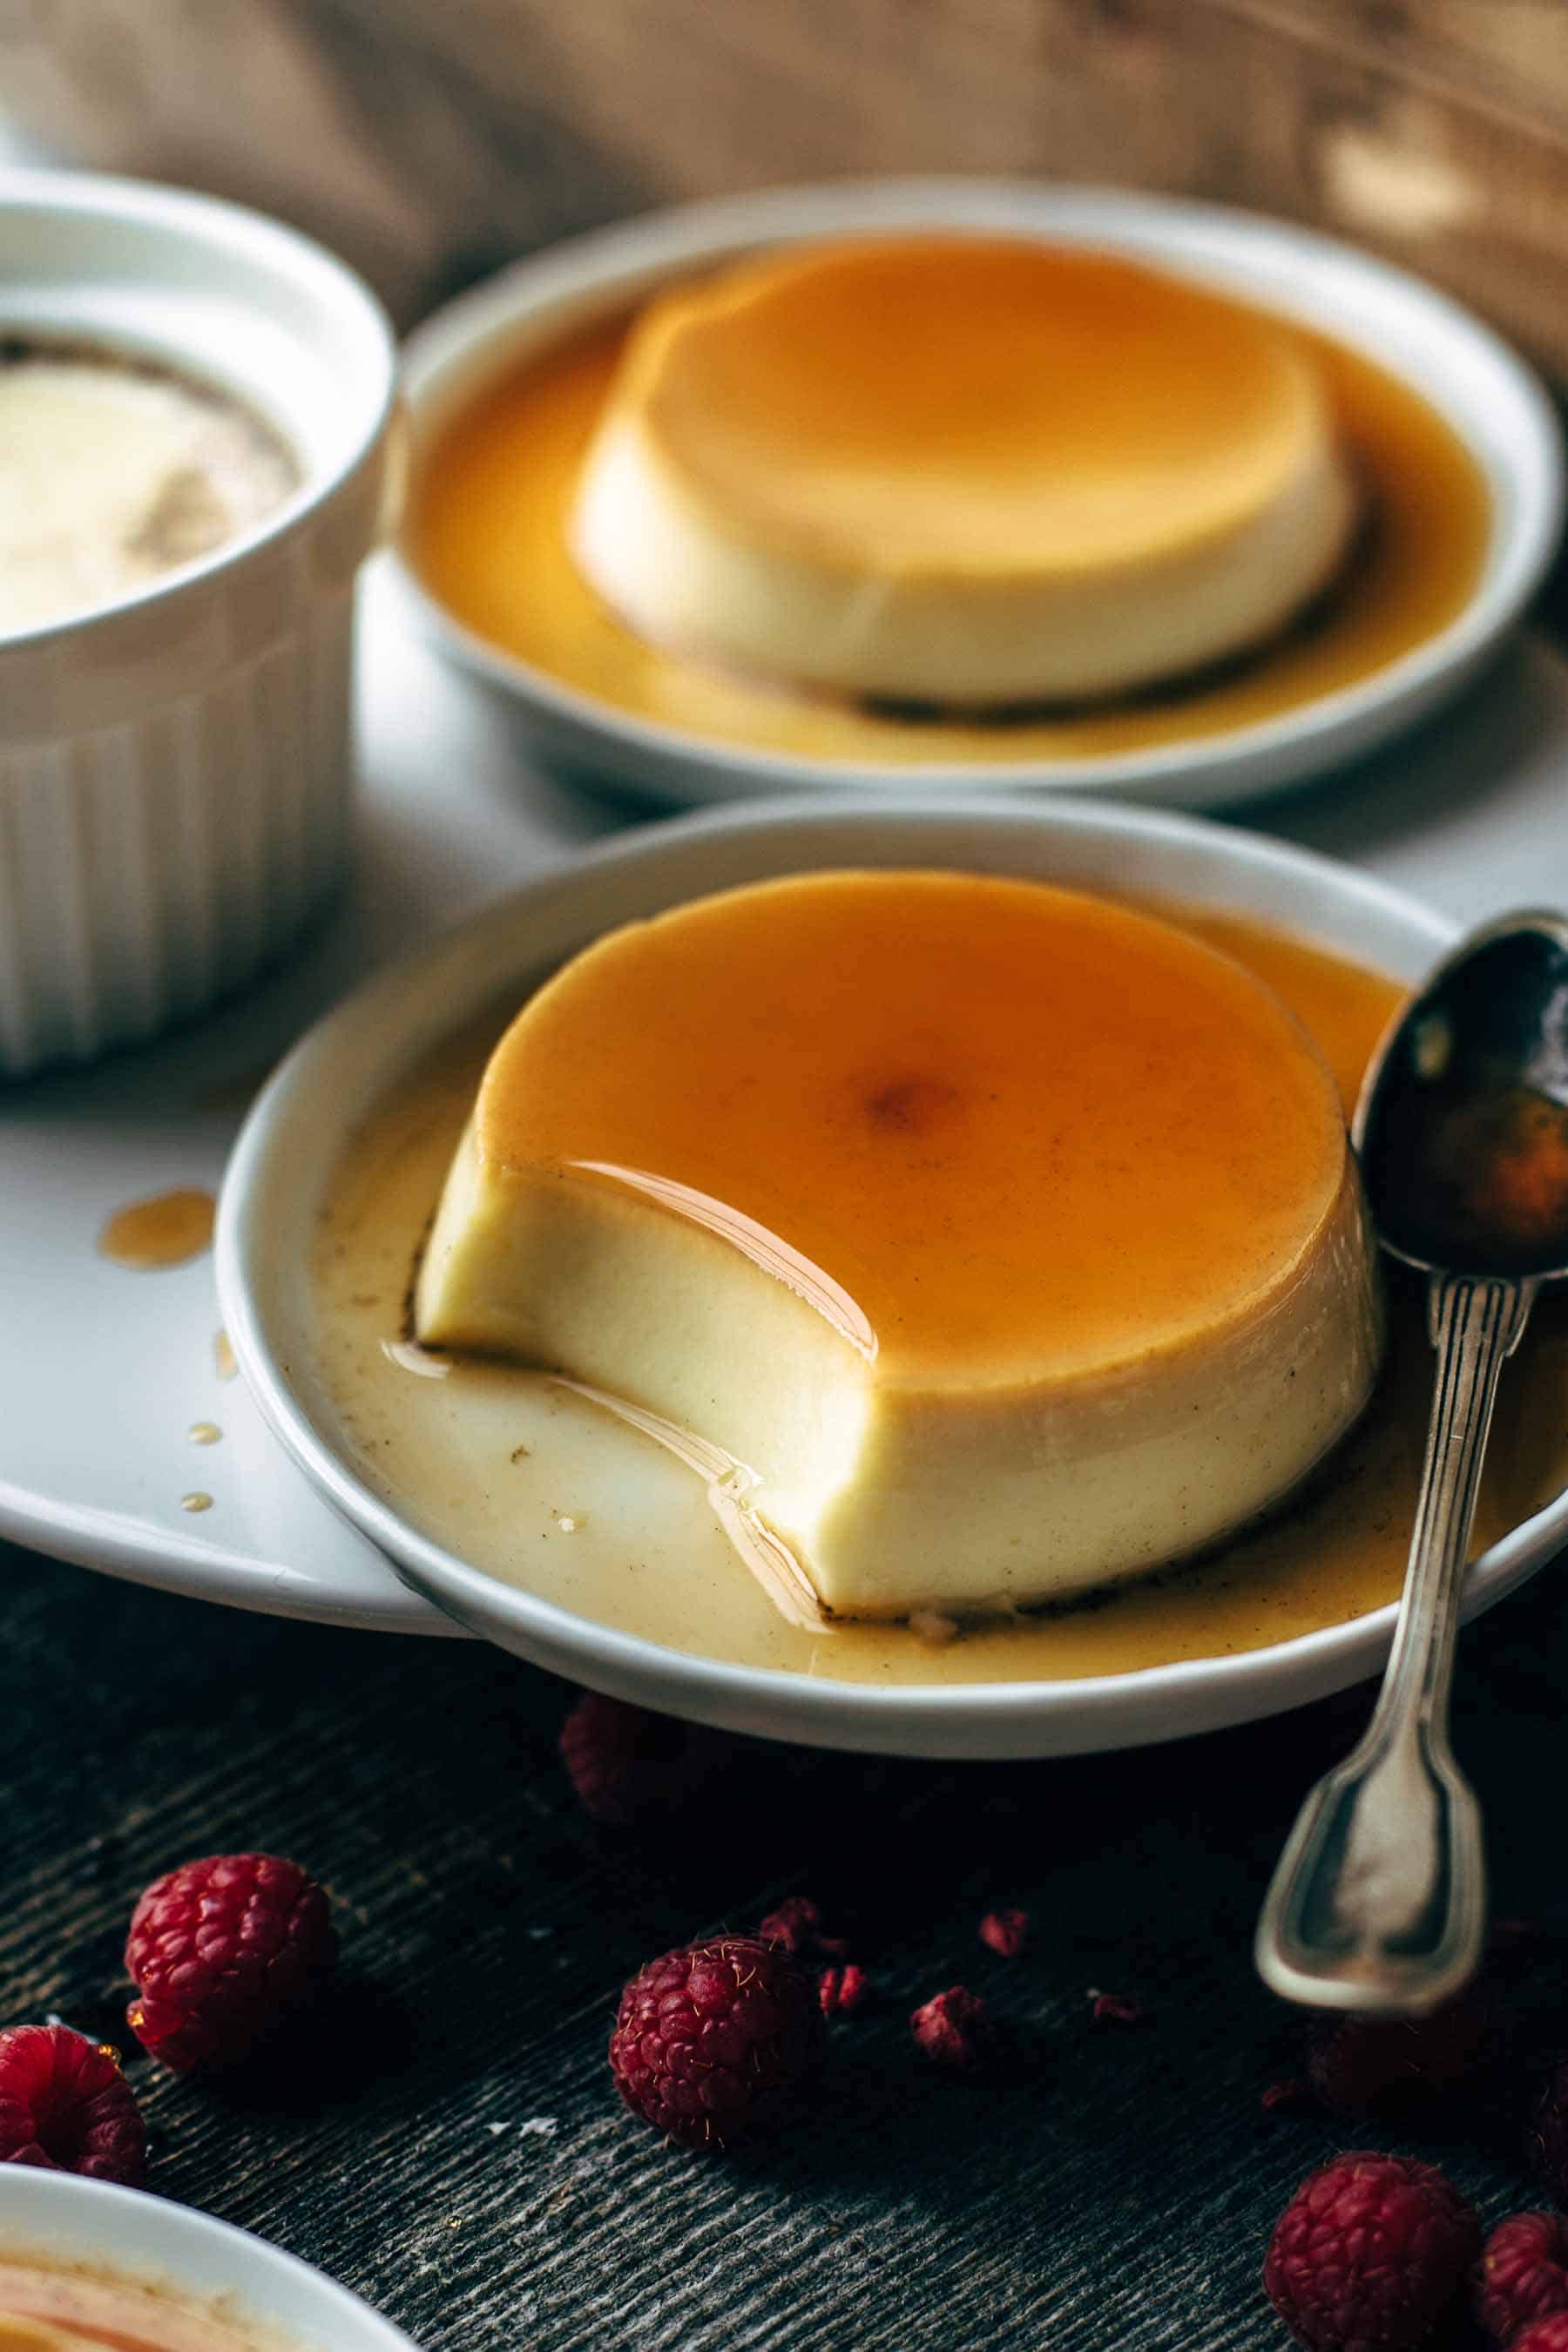 two dessert plates with flan and thin sugar syrup with one having a bite taken out with a spoon